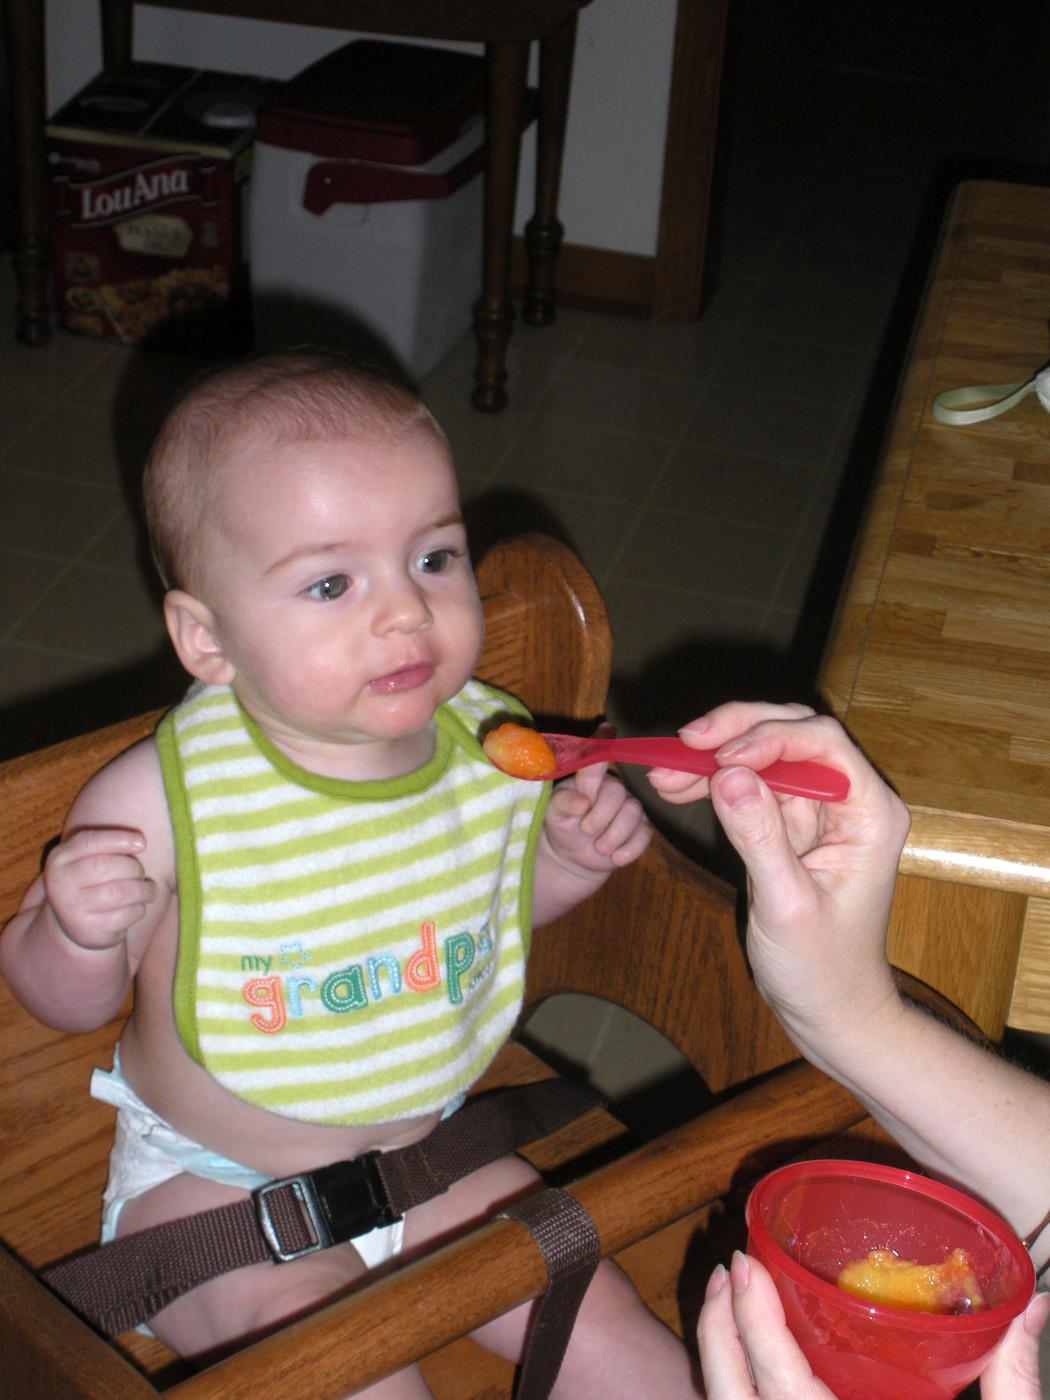 Ainsley Grey Trimm, of Starkville, enjoys pureed yellow squash and carrots that her mother prepared for her. Ainsley Grey's parents and many others find baby food easy and inexpensive to make. (Courtesy photo provided by Sara Stone)